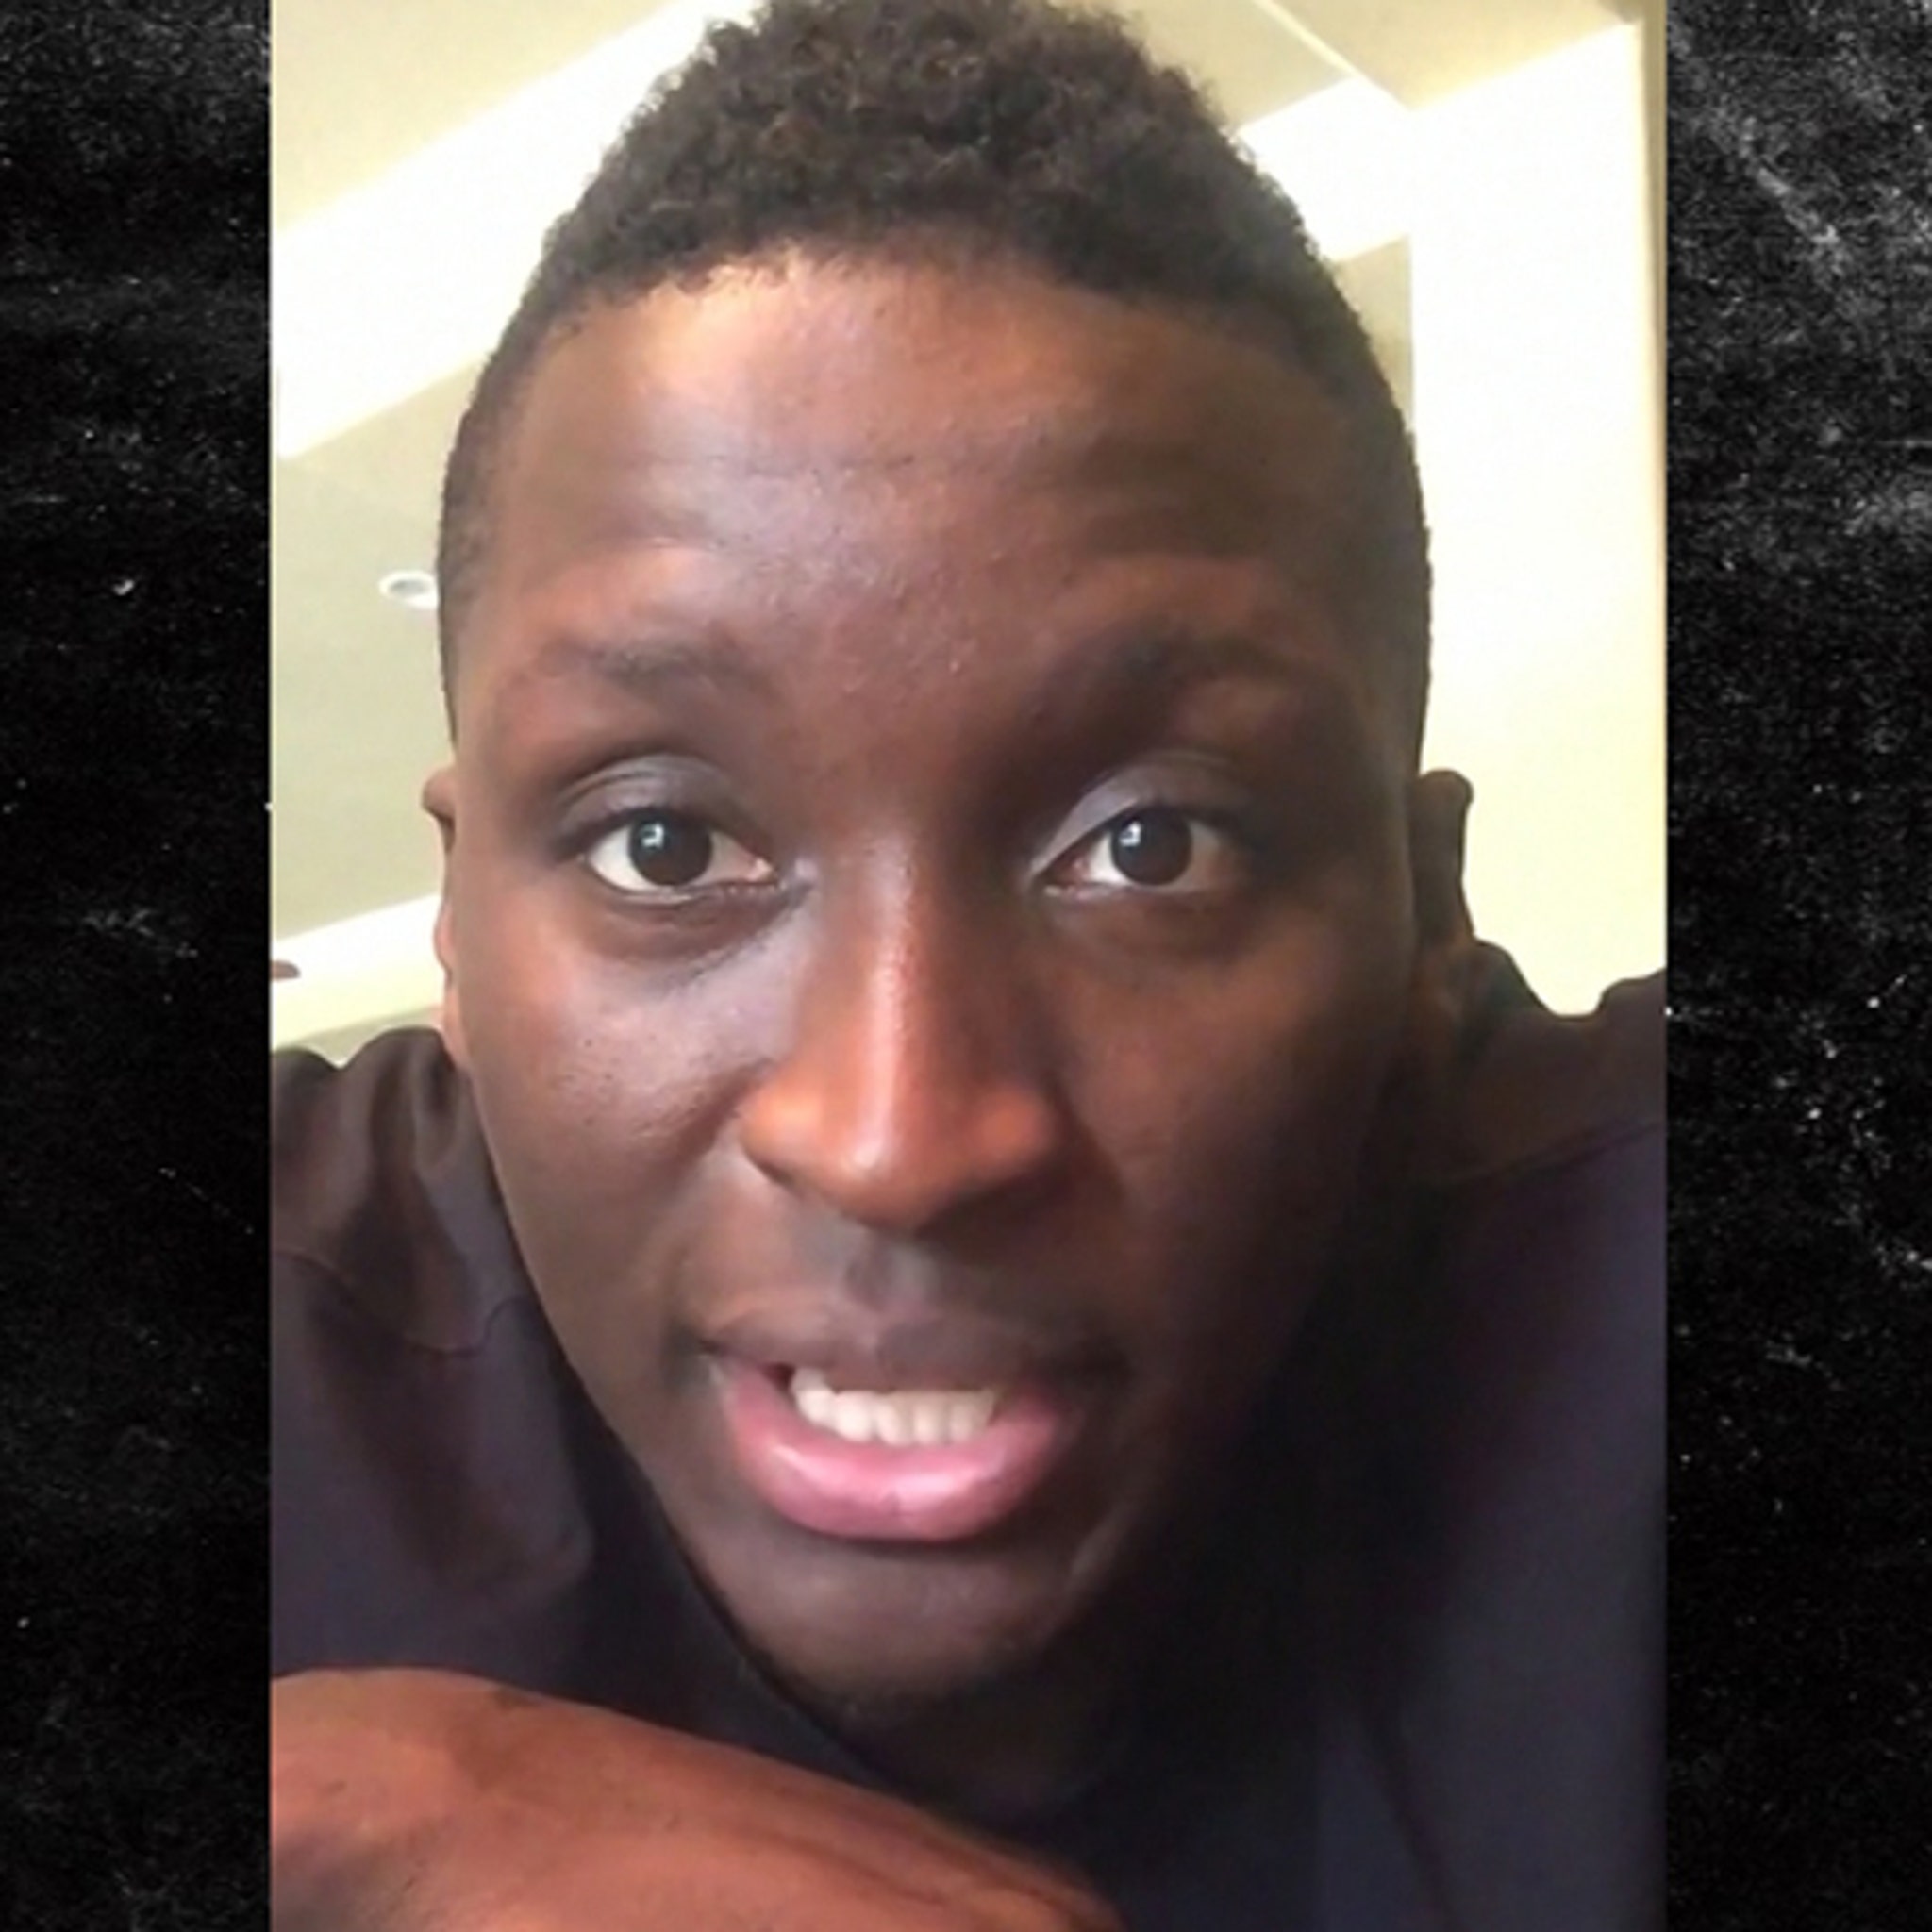 Victor Oladipo on Instagram: “Ain't no real sense in me goin' the